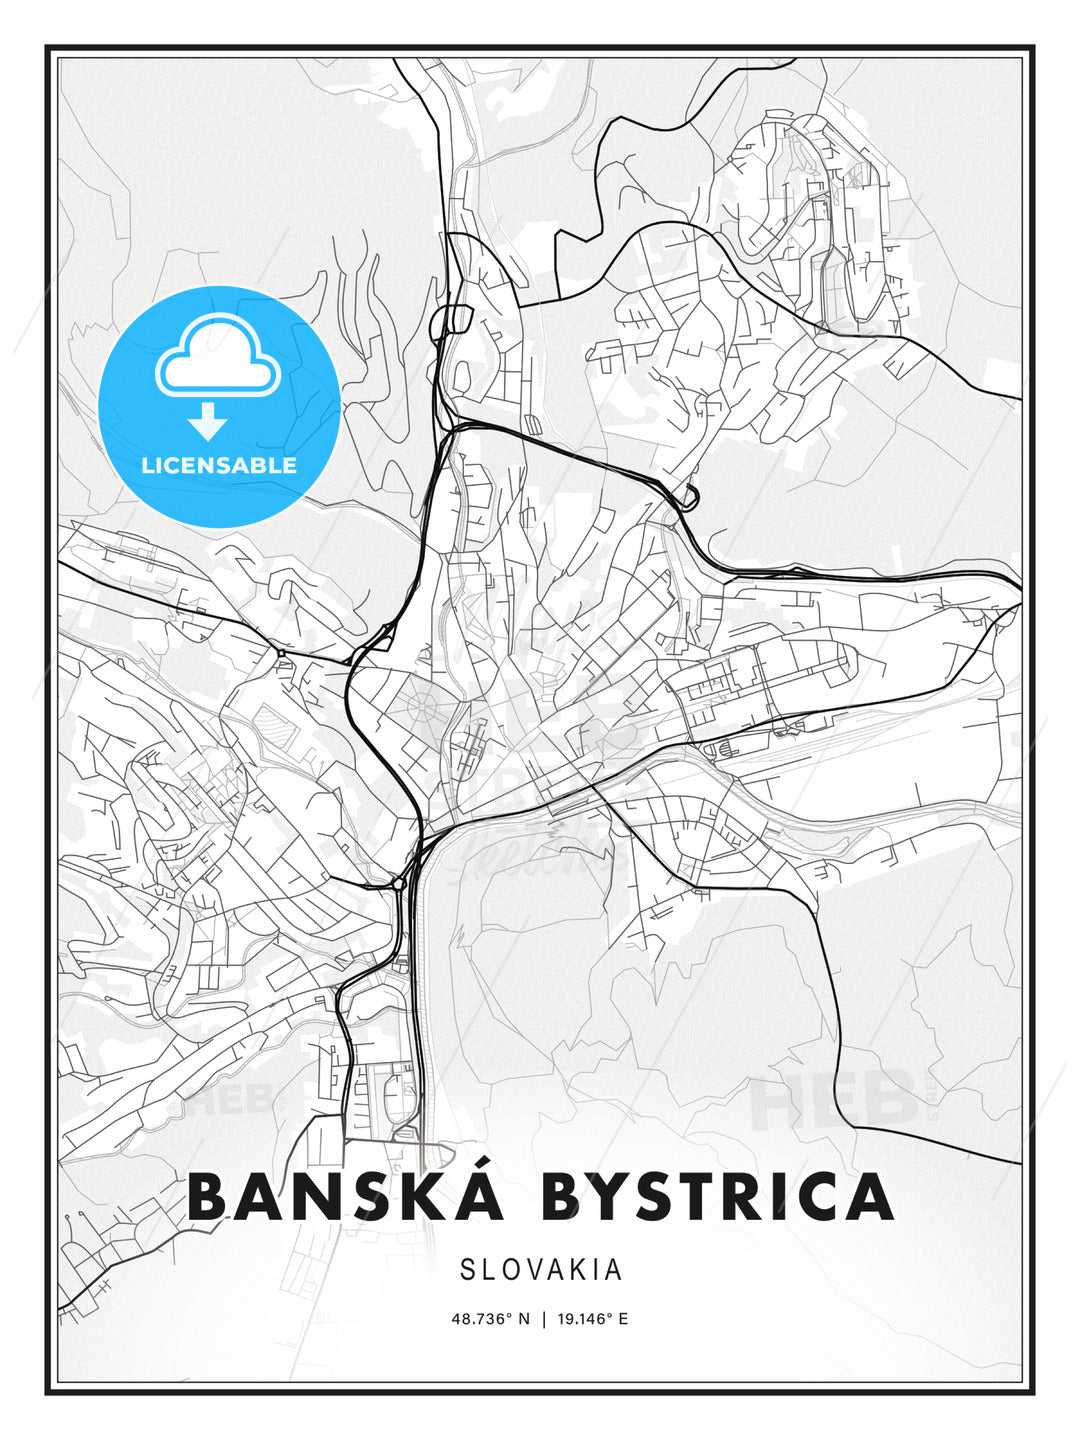 Banská Bystrica, Slovakia, Modern Print Template in Various Formats - HEBSTREITS Sketches